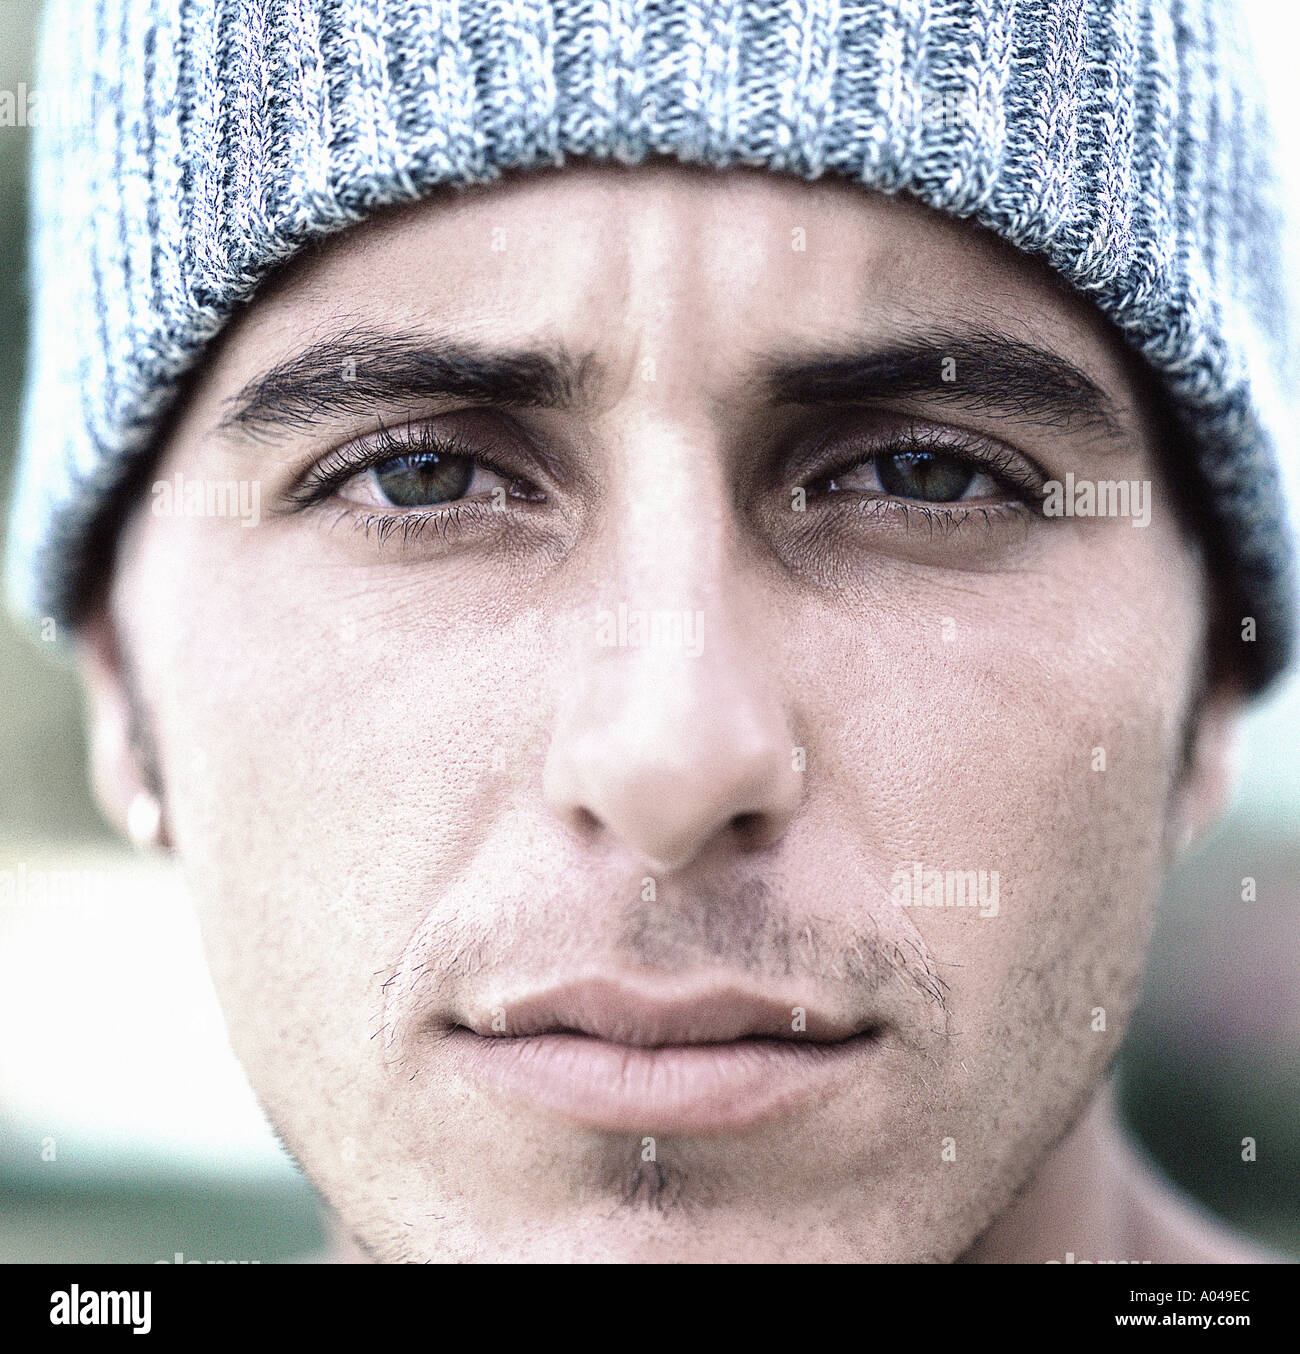 Close up portrait of a young man wearing a grey wool hat Stock Photo